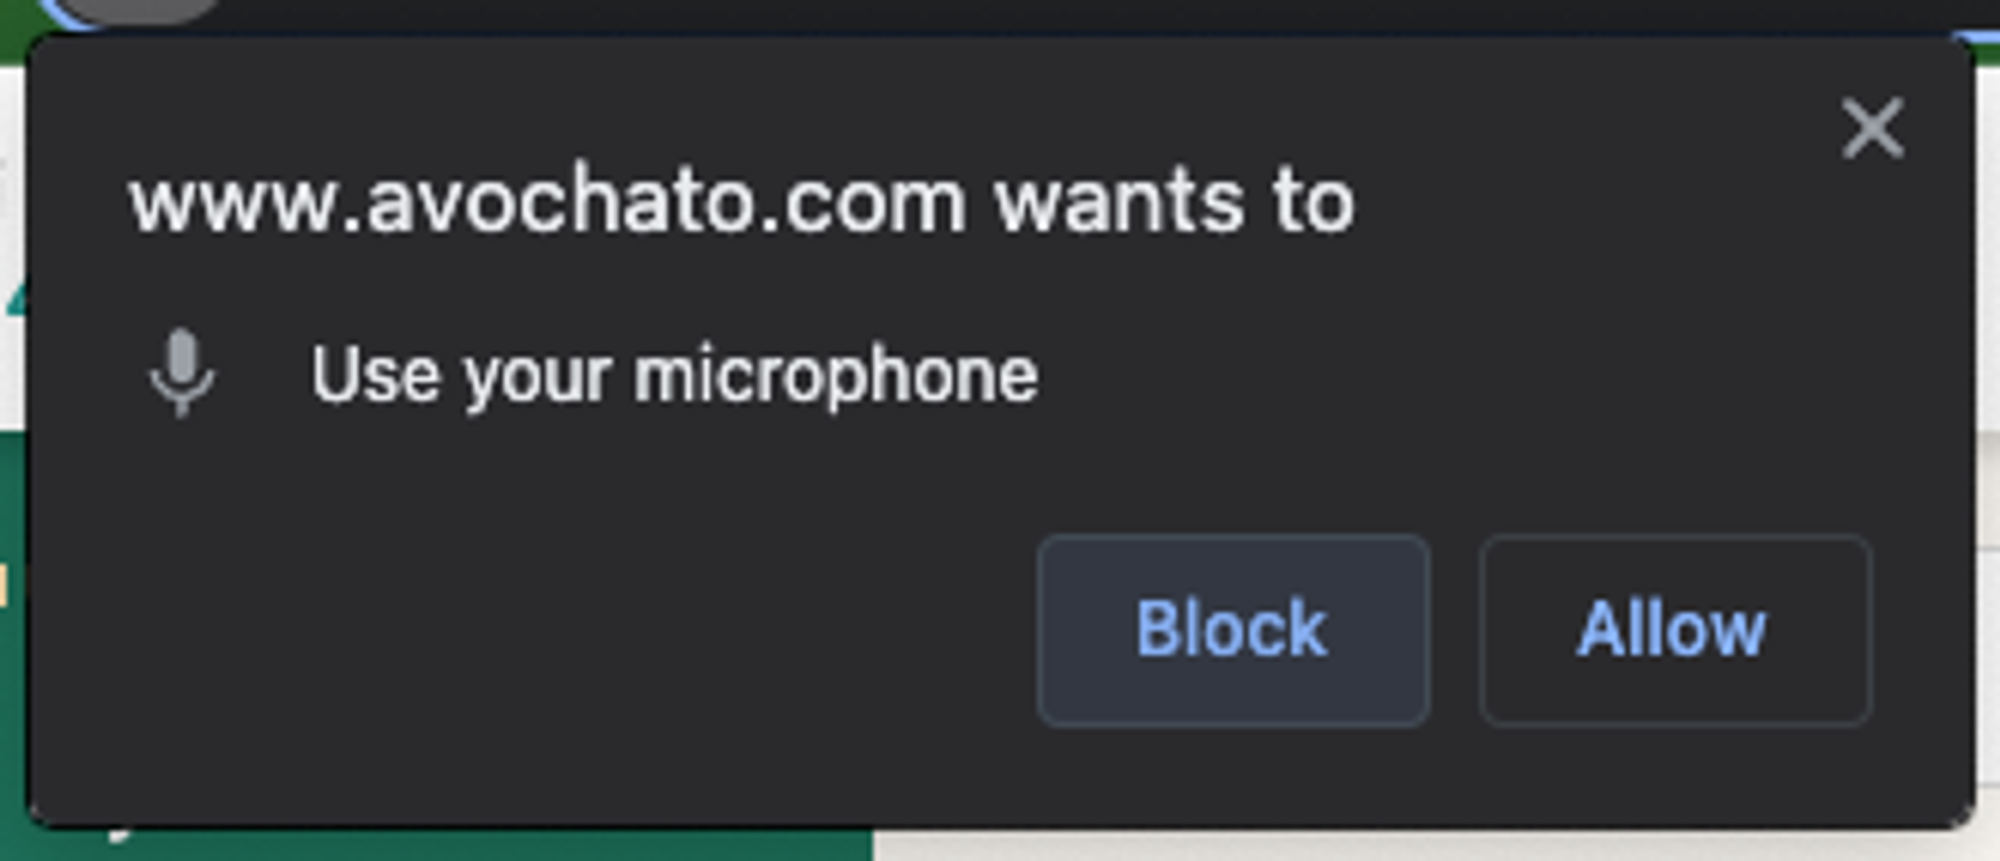 Prompt from Google Chrome